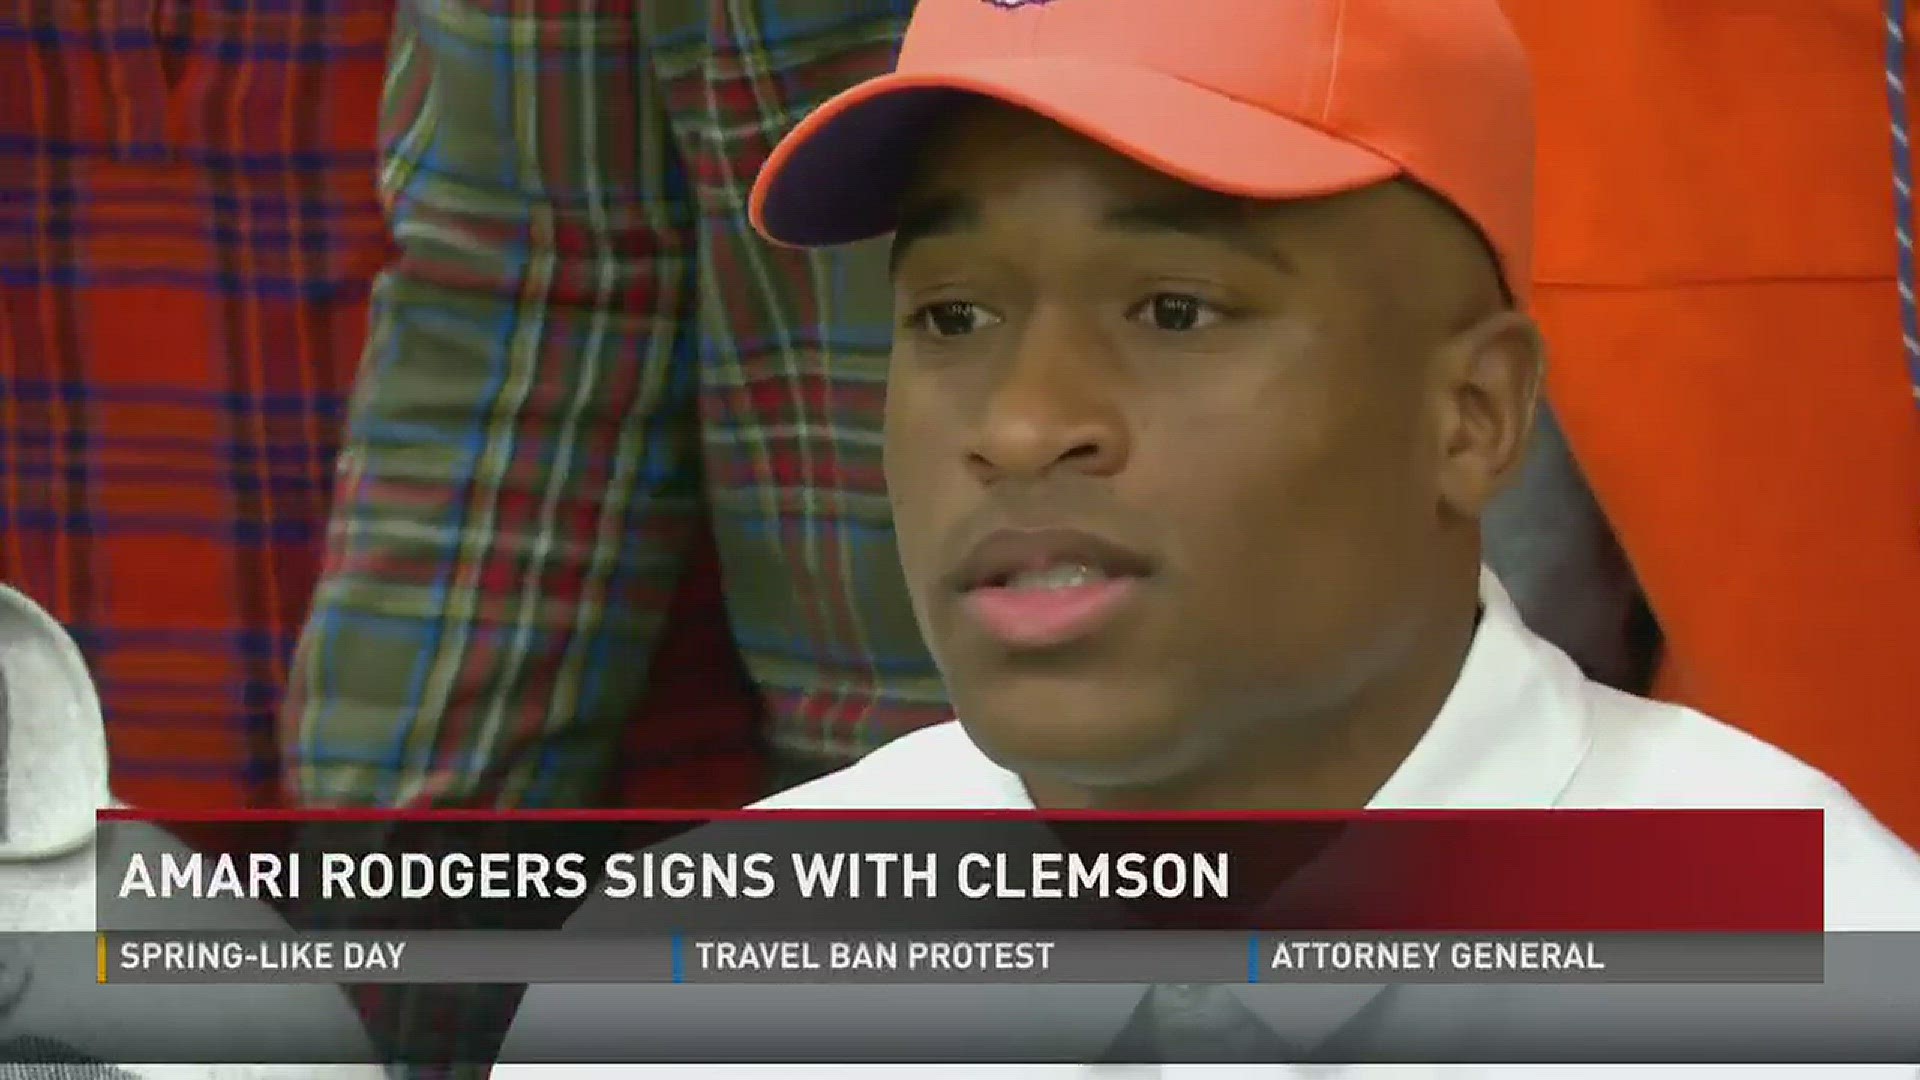 Catholic receiver Amari Rodgers signs with Clemson. Wednesday, Feb. 1, 2017 noon.